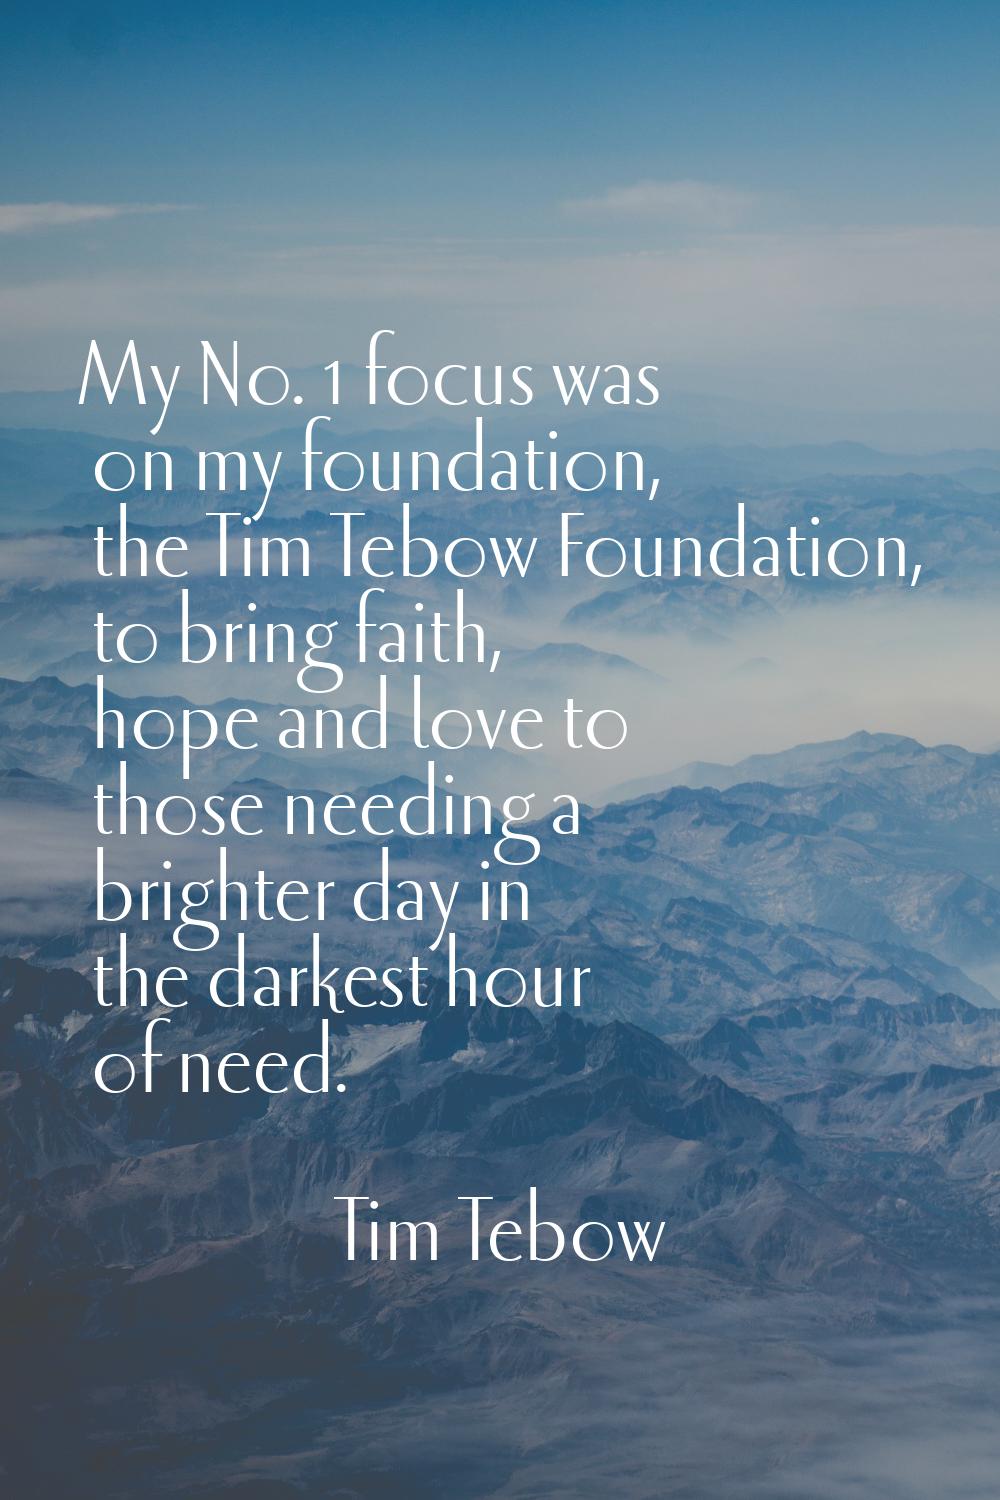 My No. 1 focus was on my foundation, the Tim Tebow Foundation, to bring faith, hope and love to tho